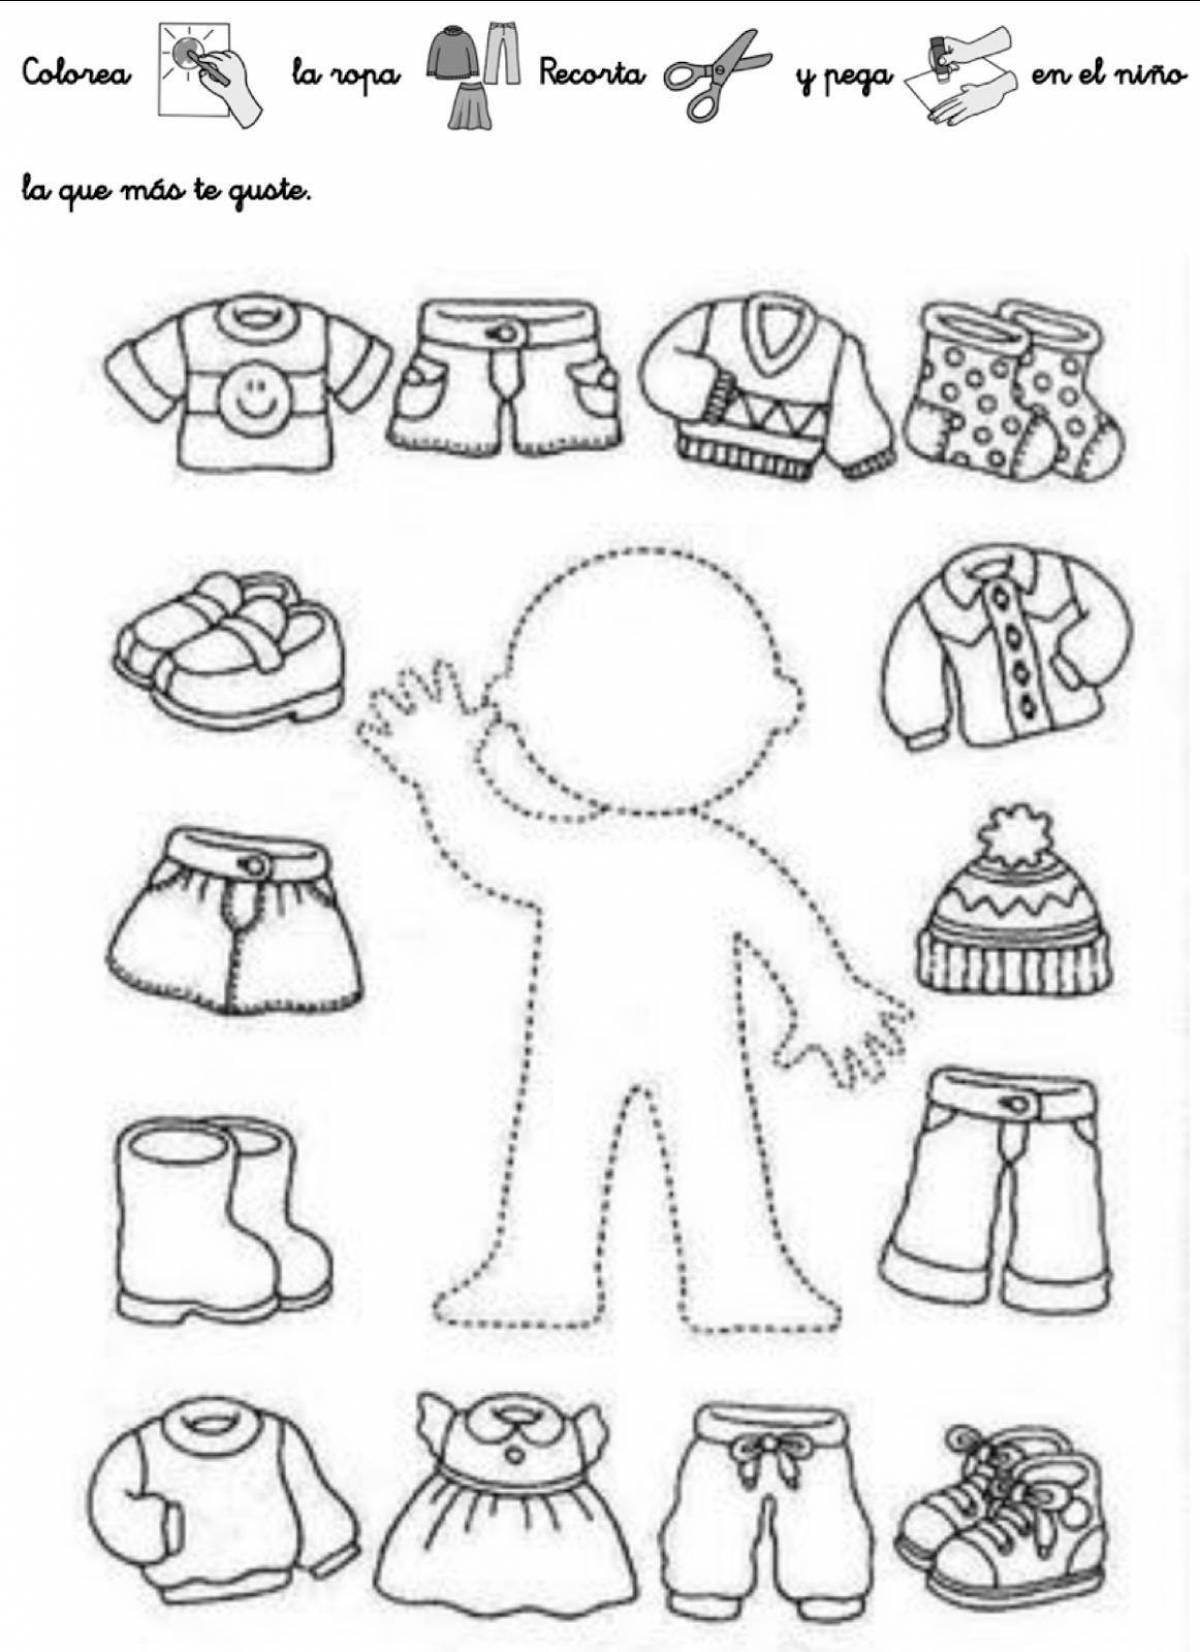 Fun clothes coloring book for 4-5 year olds